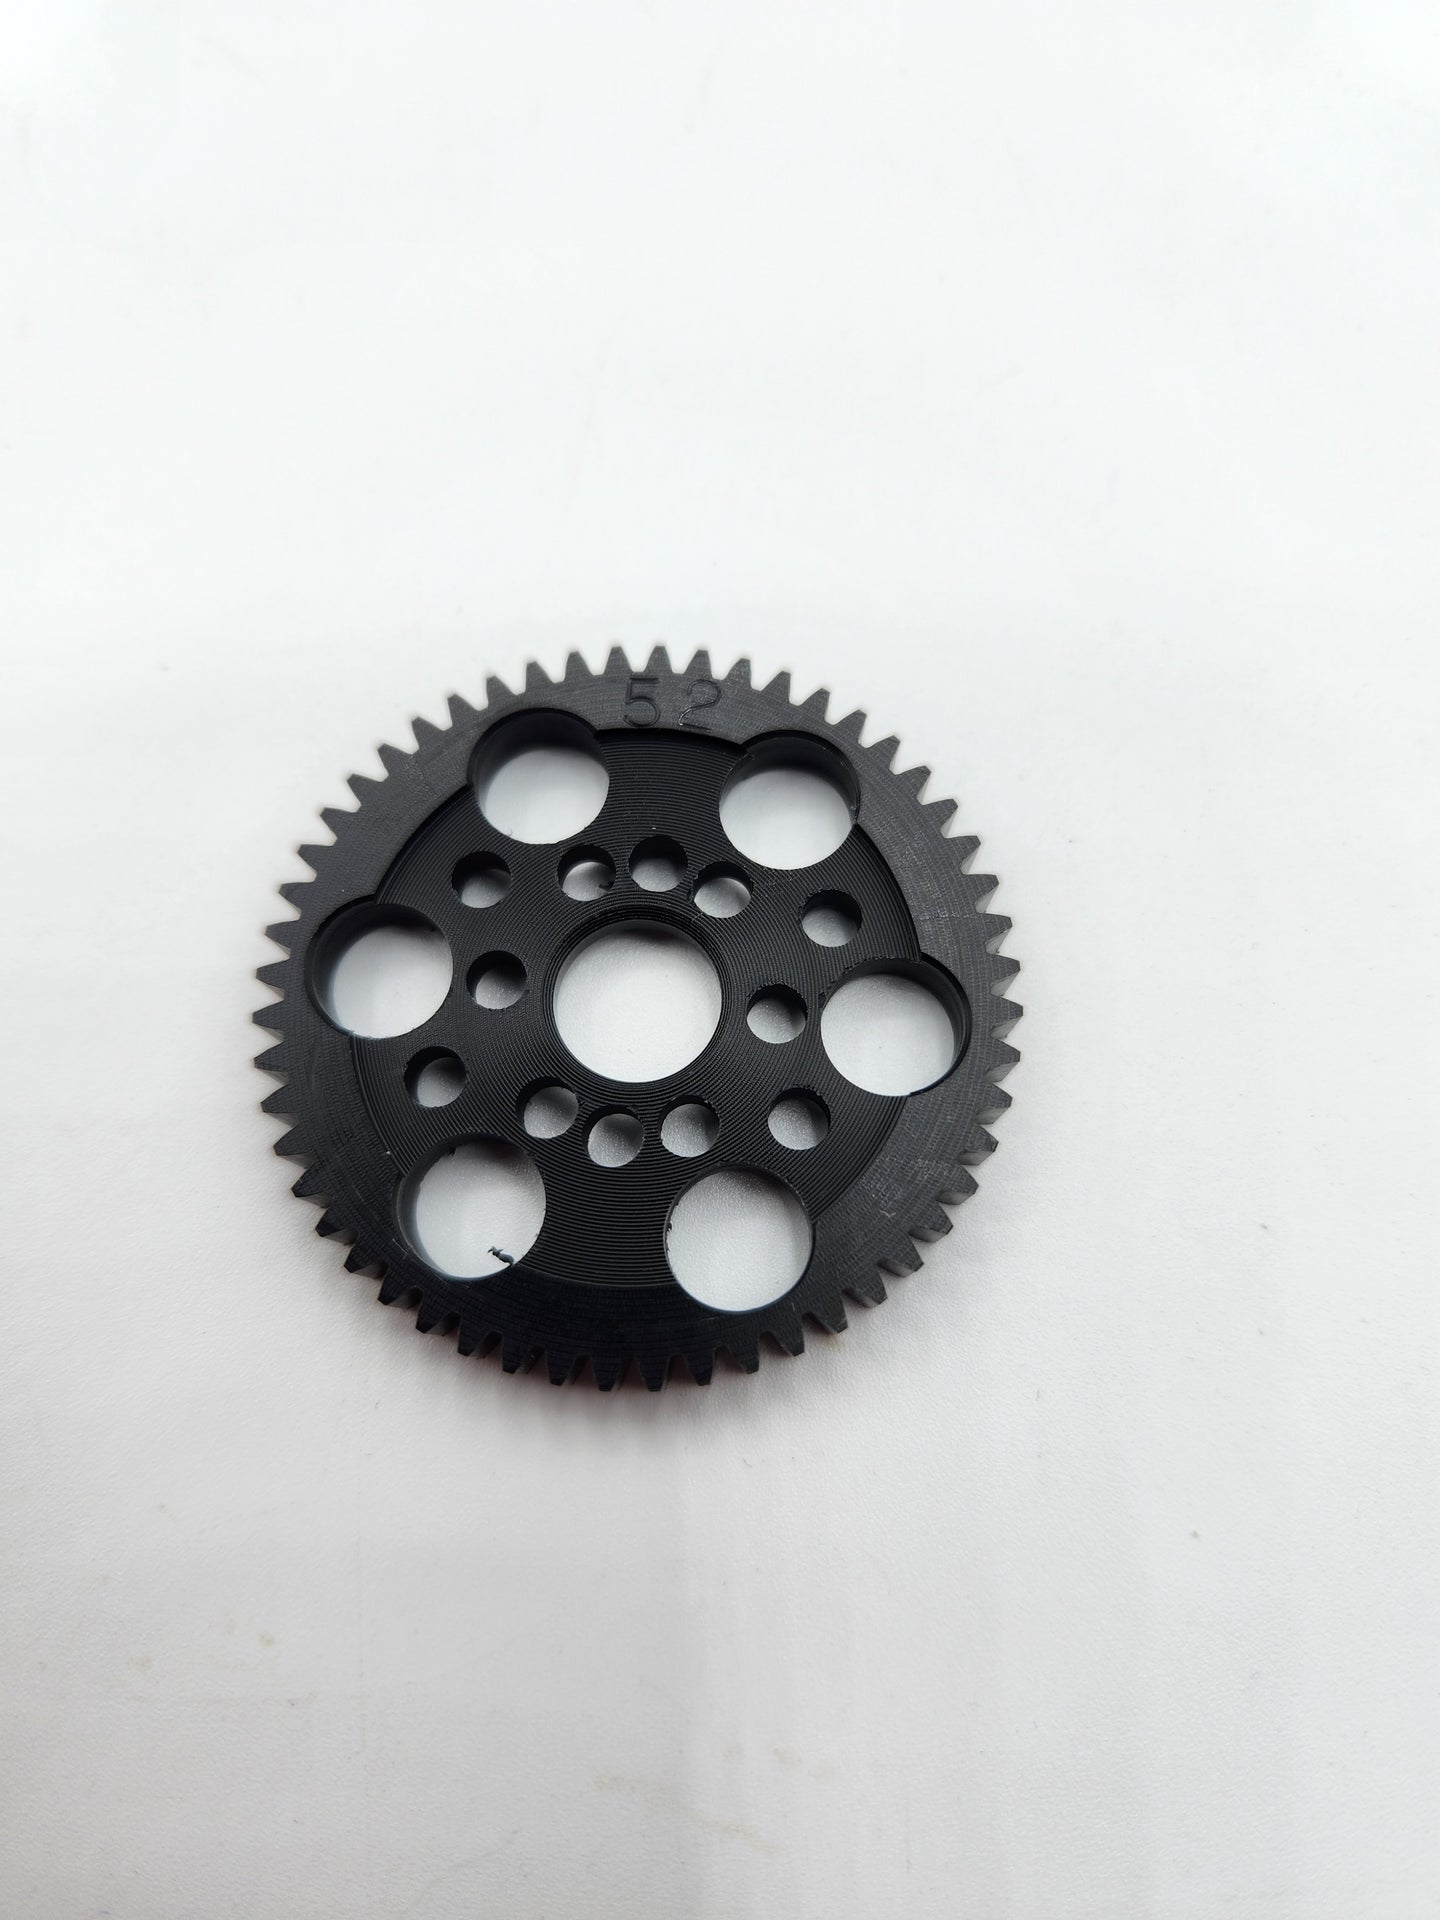 50T-66T FIVESTAR 32 PITCH WIDE SPUR GEARS (SOLD INDIVIDUALLY)